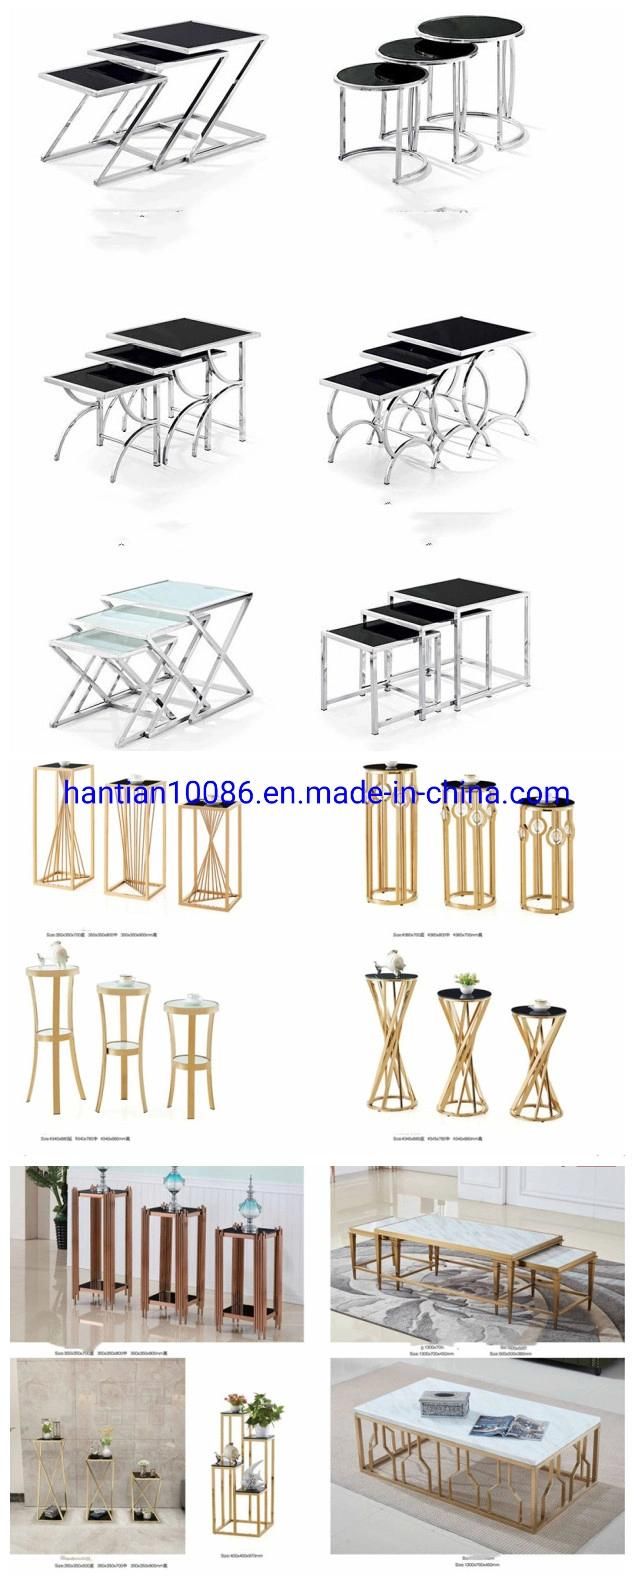 Gold Wedding Side Table New Funny Amusement Park Items Cake Sand Table